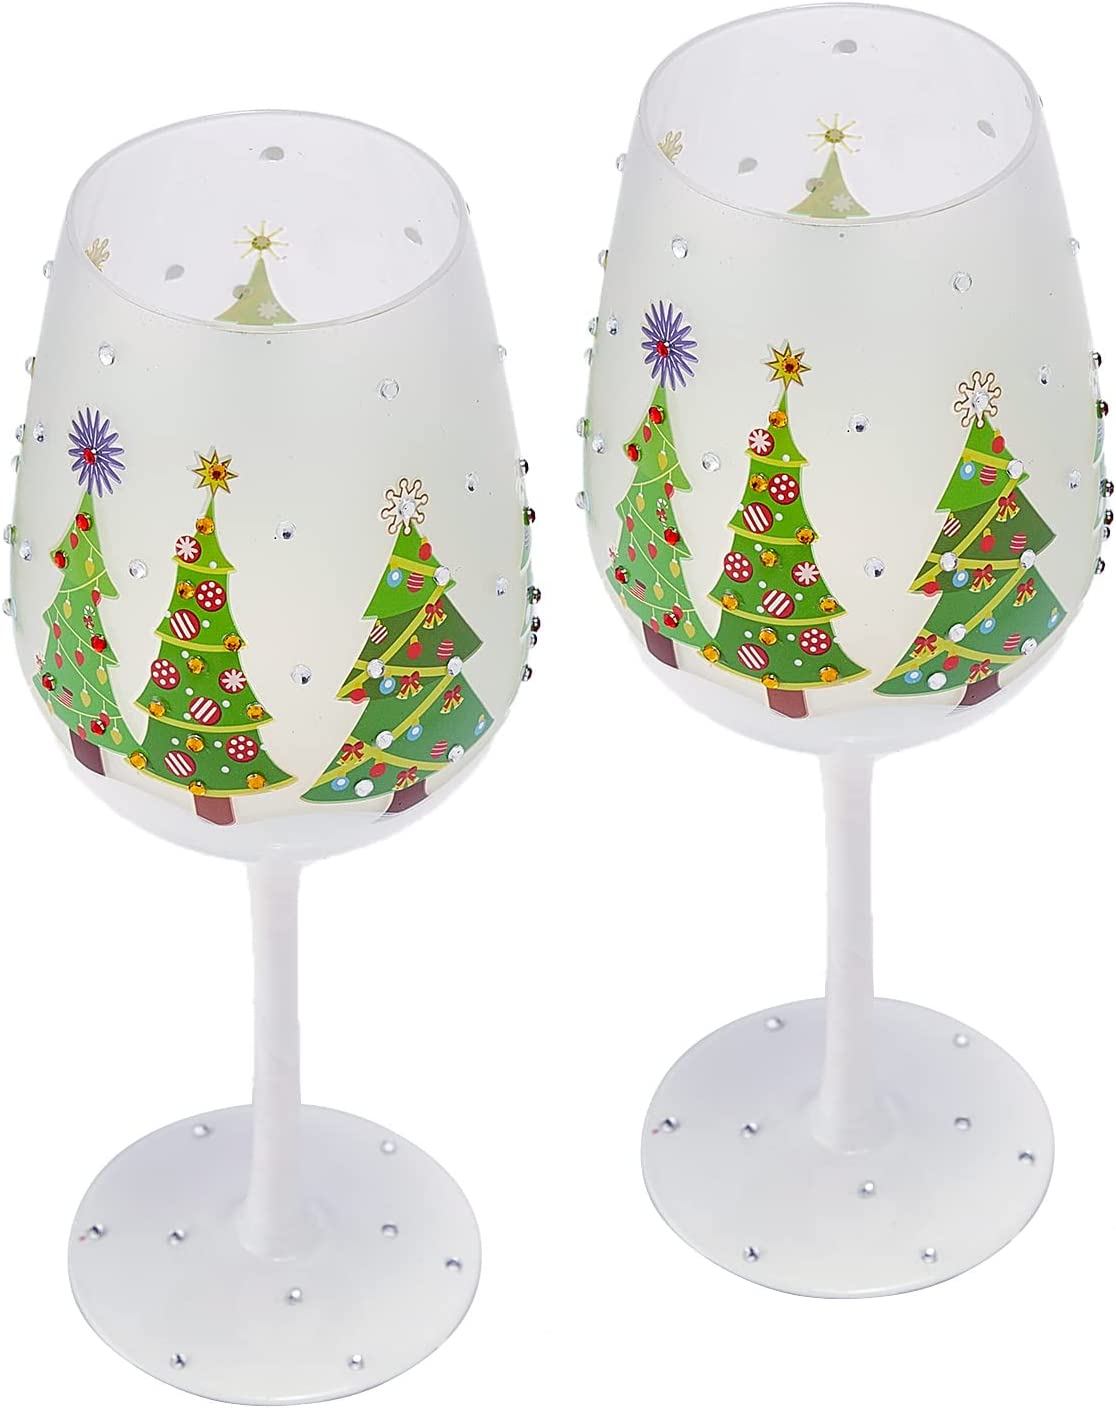 Set of 2 Stemmed Christmas Tree Design Wine Glasses - Hand Painted 14 oz Decorated Christmas Tree Glasses - Perfect for Wine, Champagne, Holiday Parties and Festivities - 8.75" High, 14 oz Capacity-5